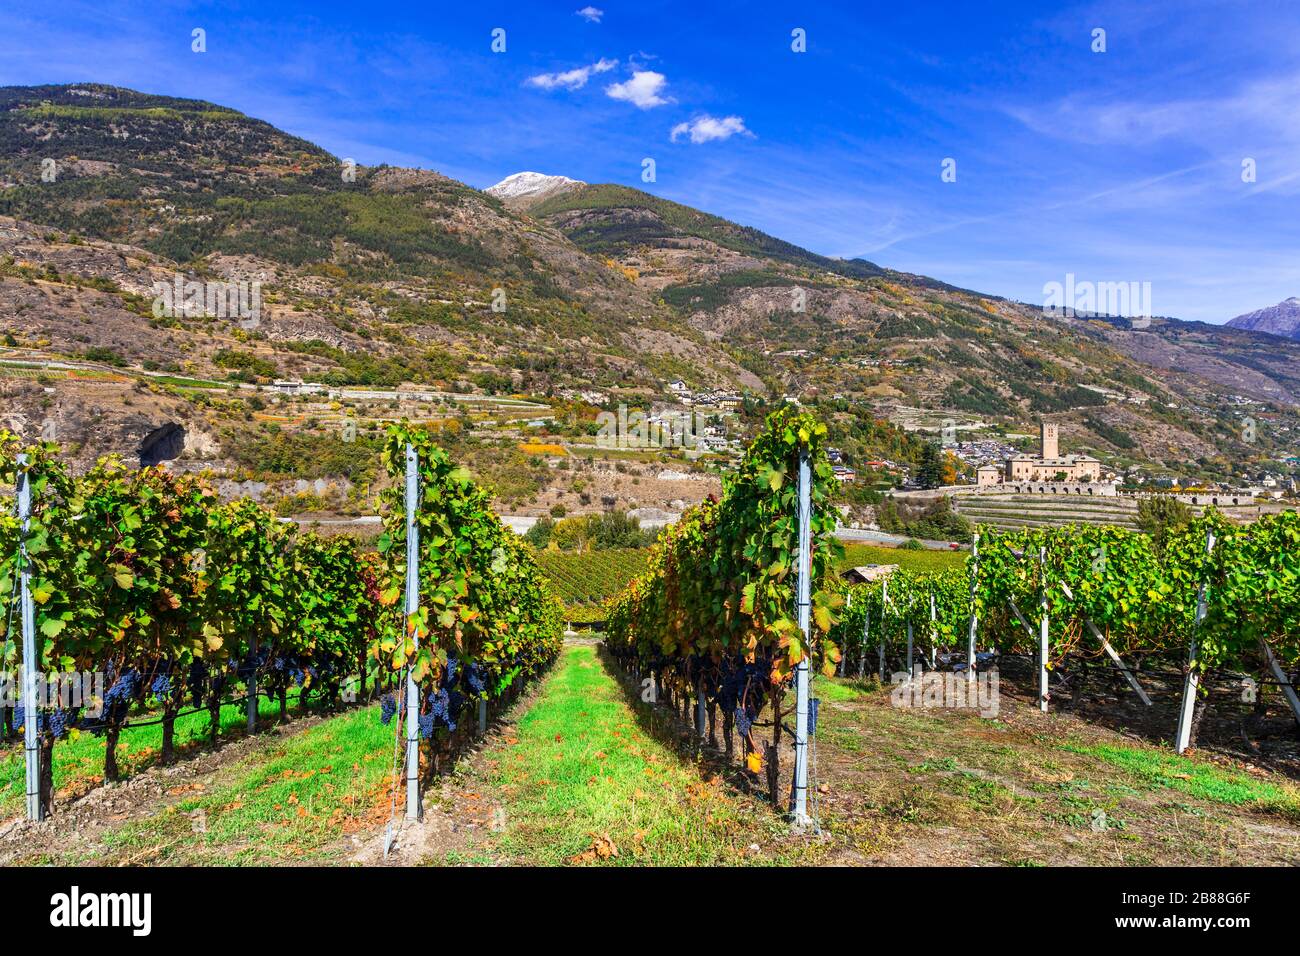 Vineyards and Sarre Castle,Valle d’ Aosta,Italy. Stock Photo